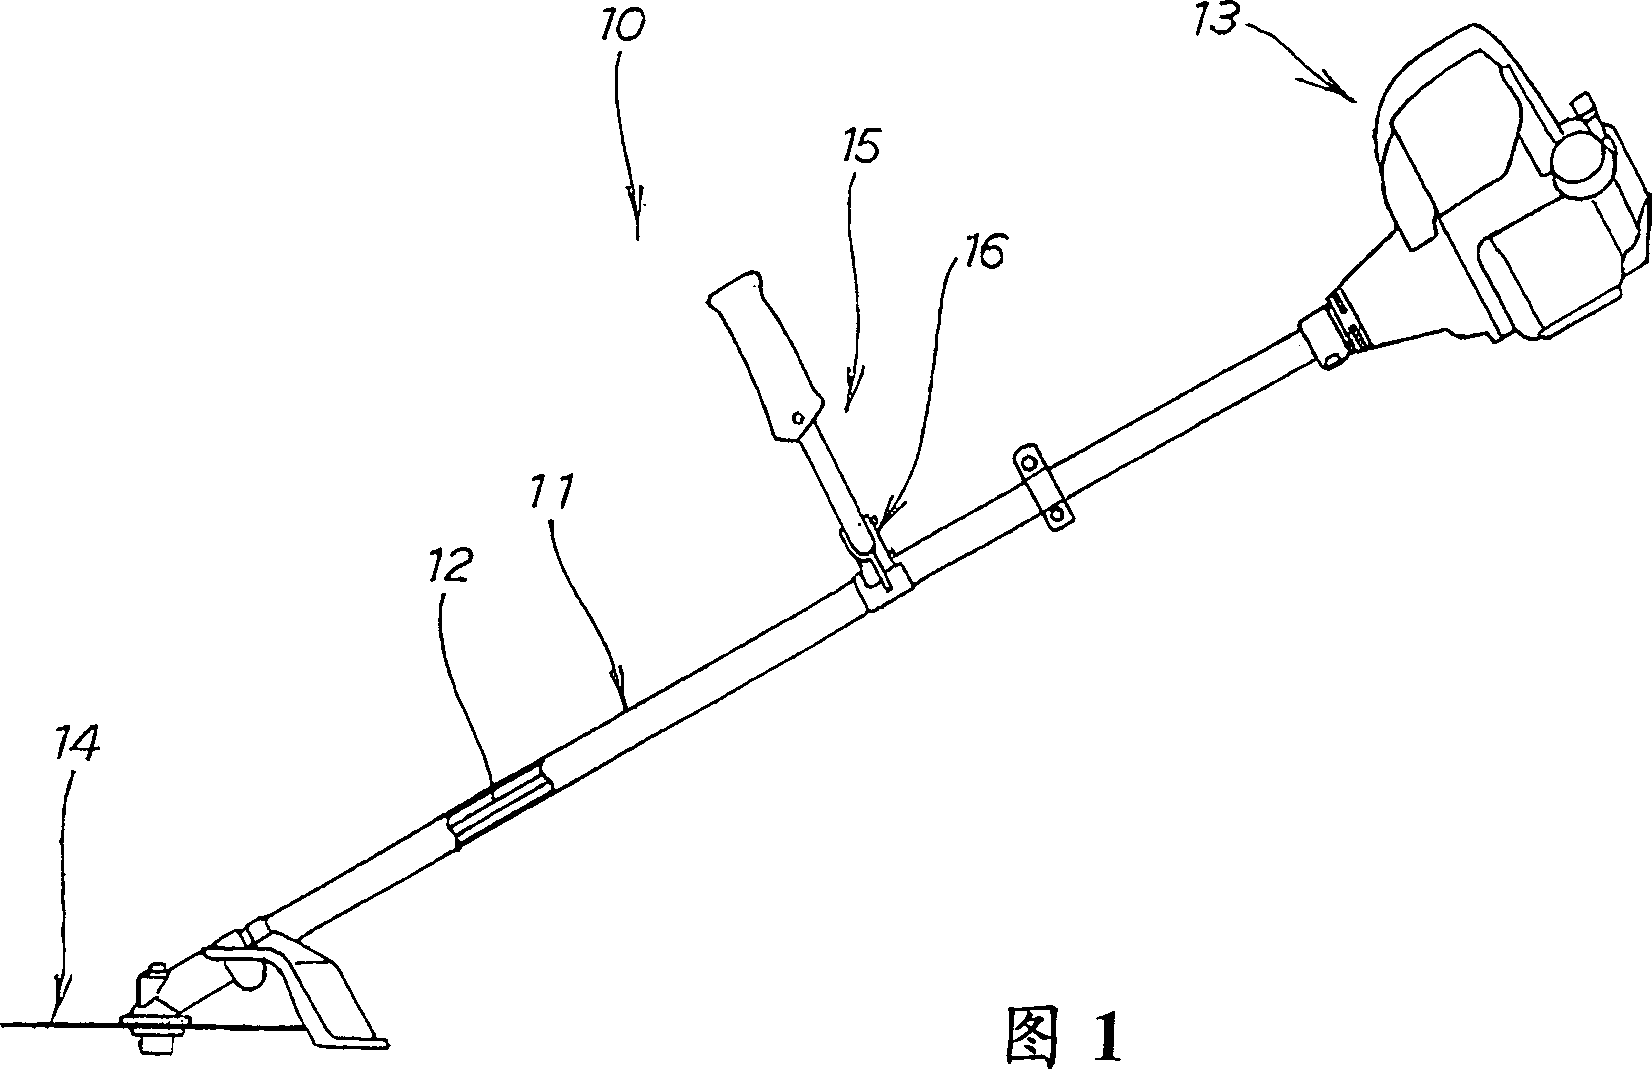 Plant uproot device